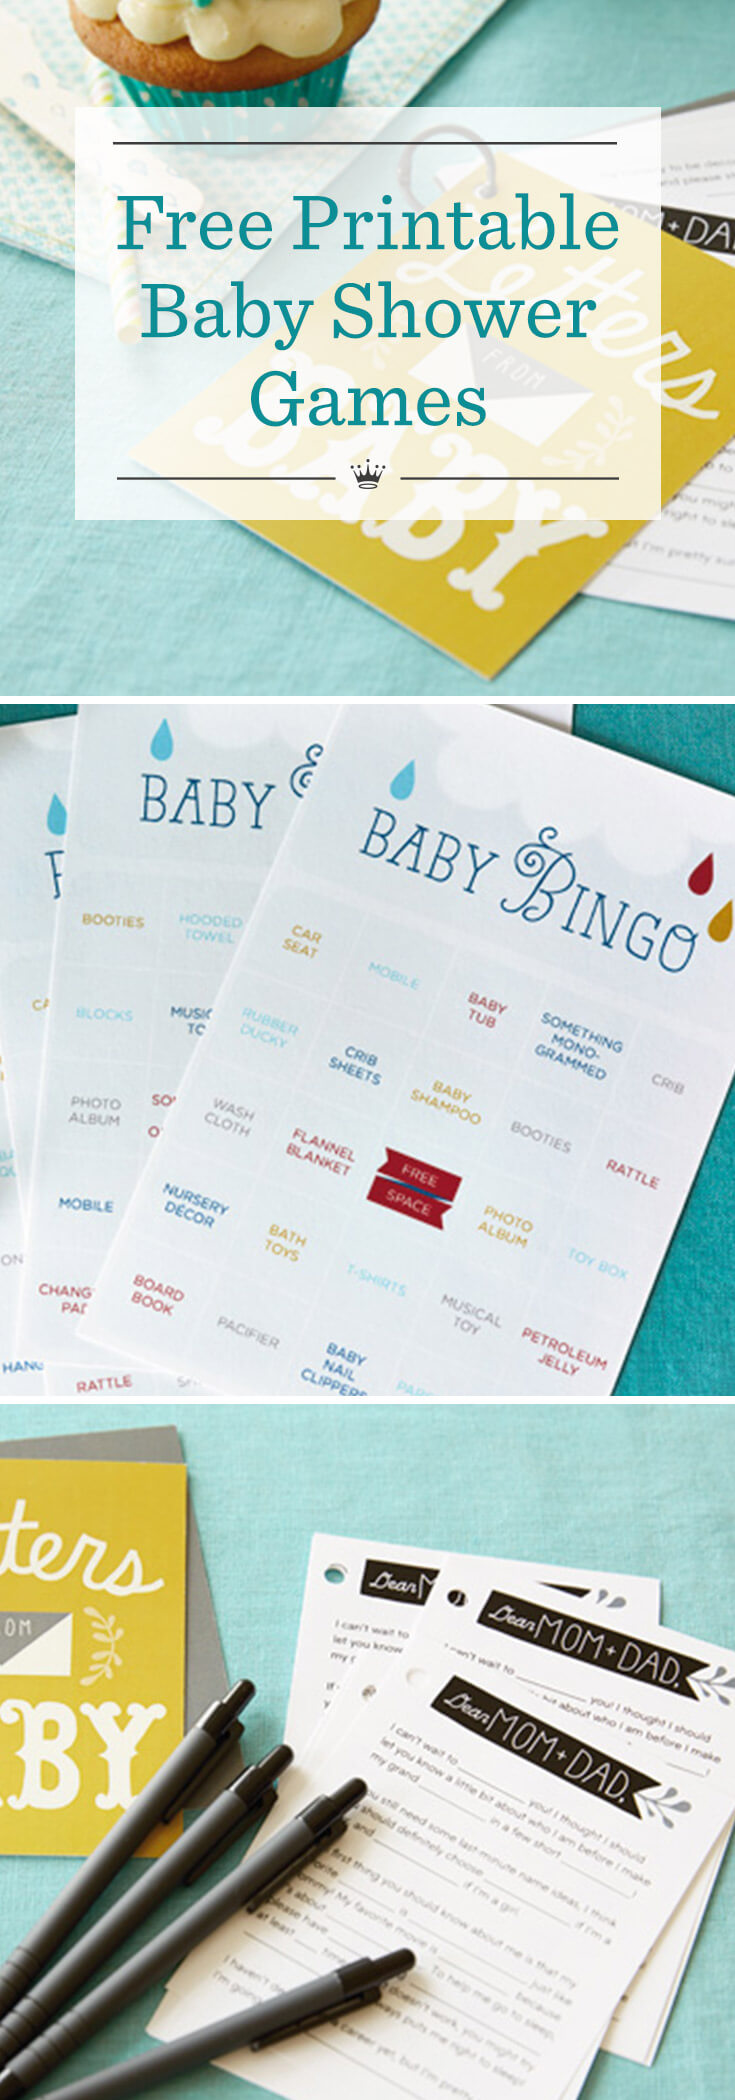 Free baby shower bingo cards to print out